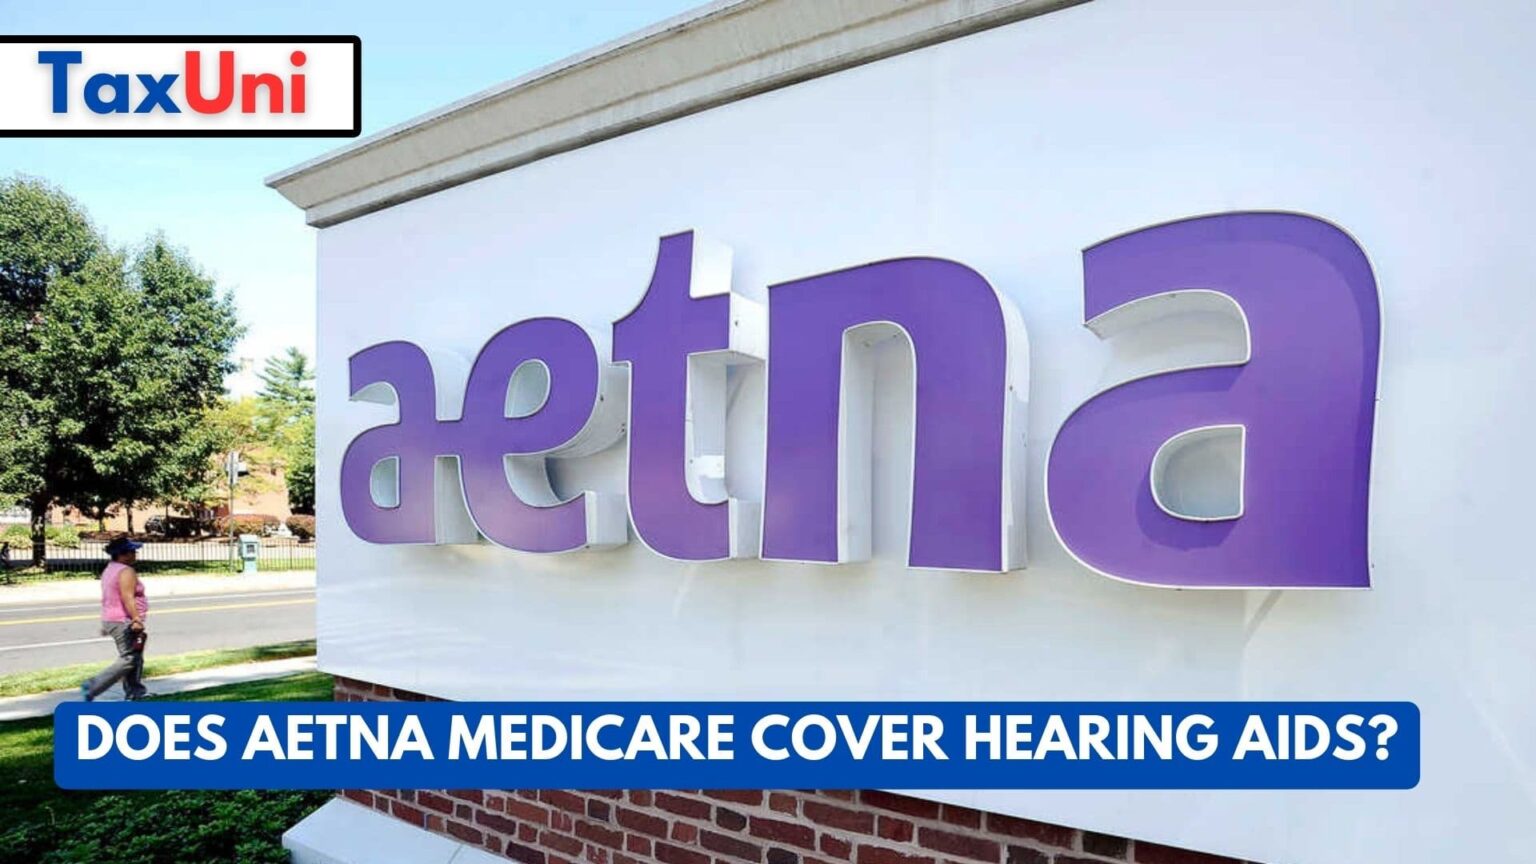 Does Aetna Medicare Cover Hearing Aids?